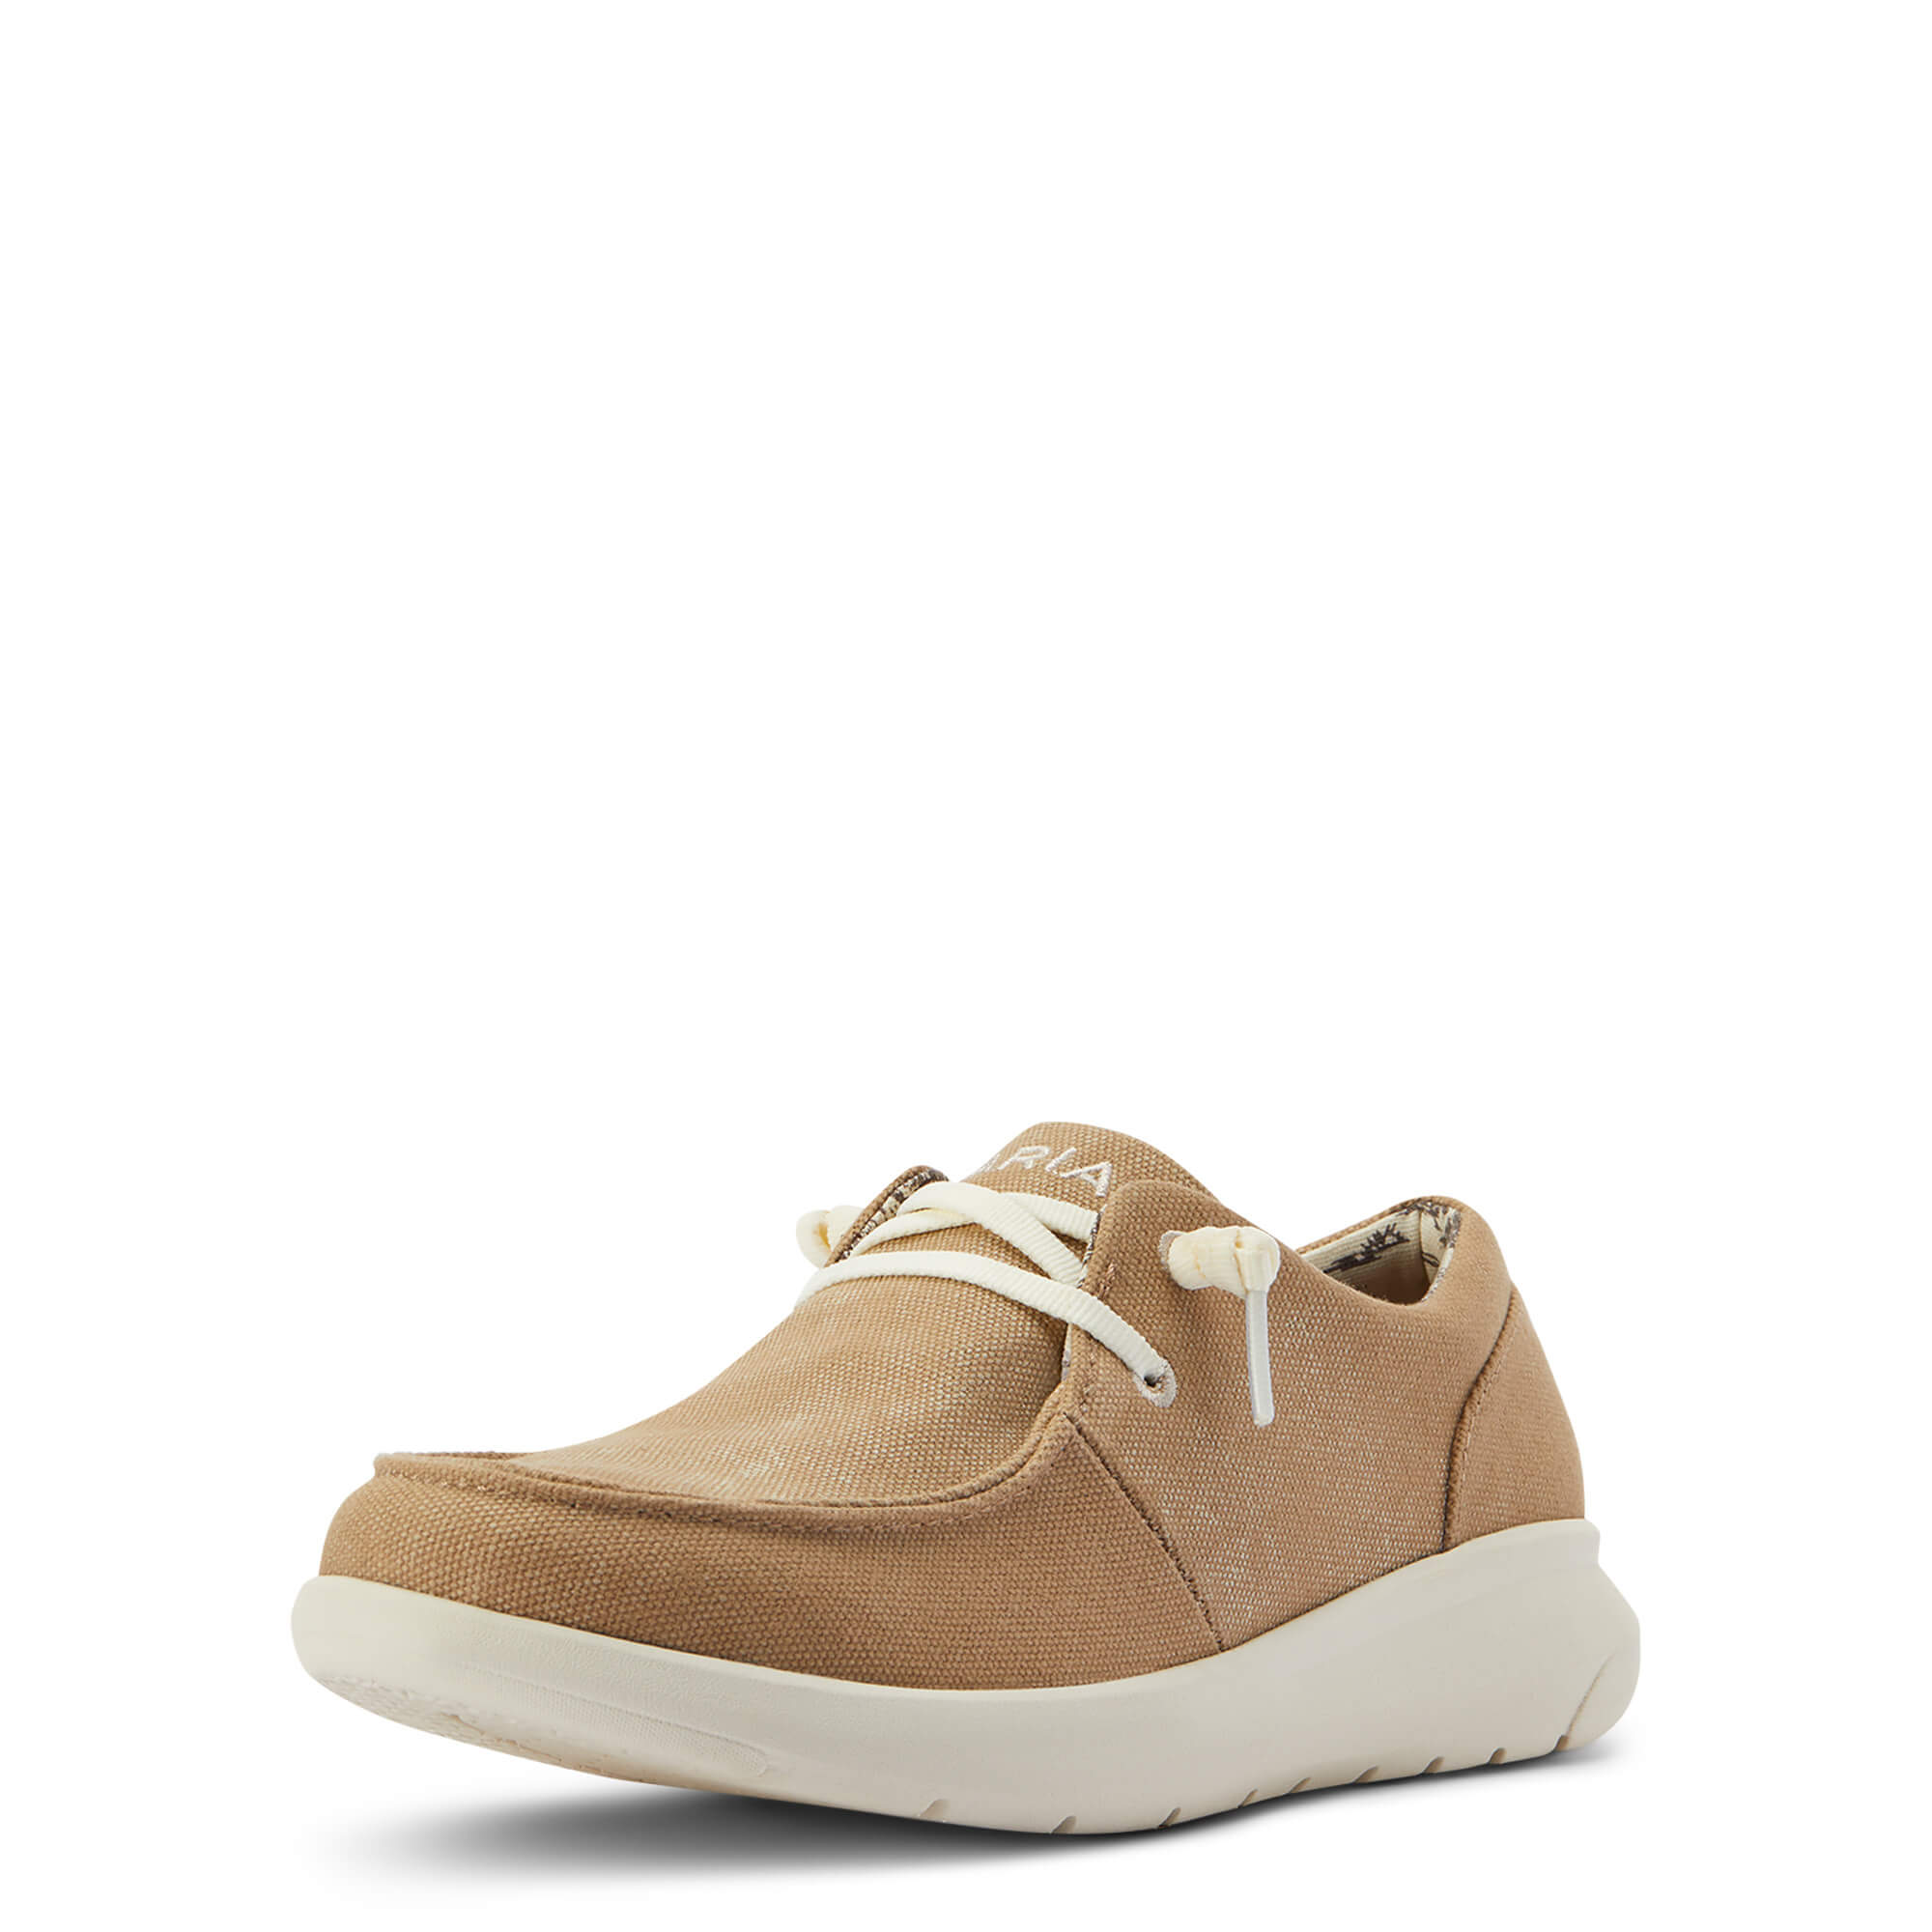 Women's Hilo WASHED TAN CANVAS